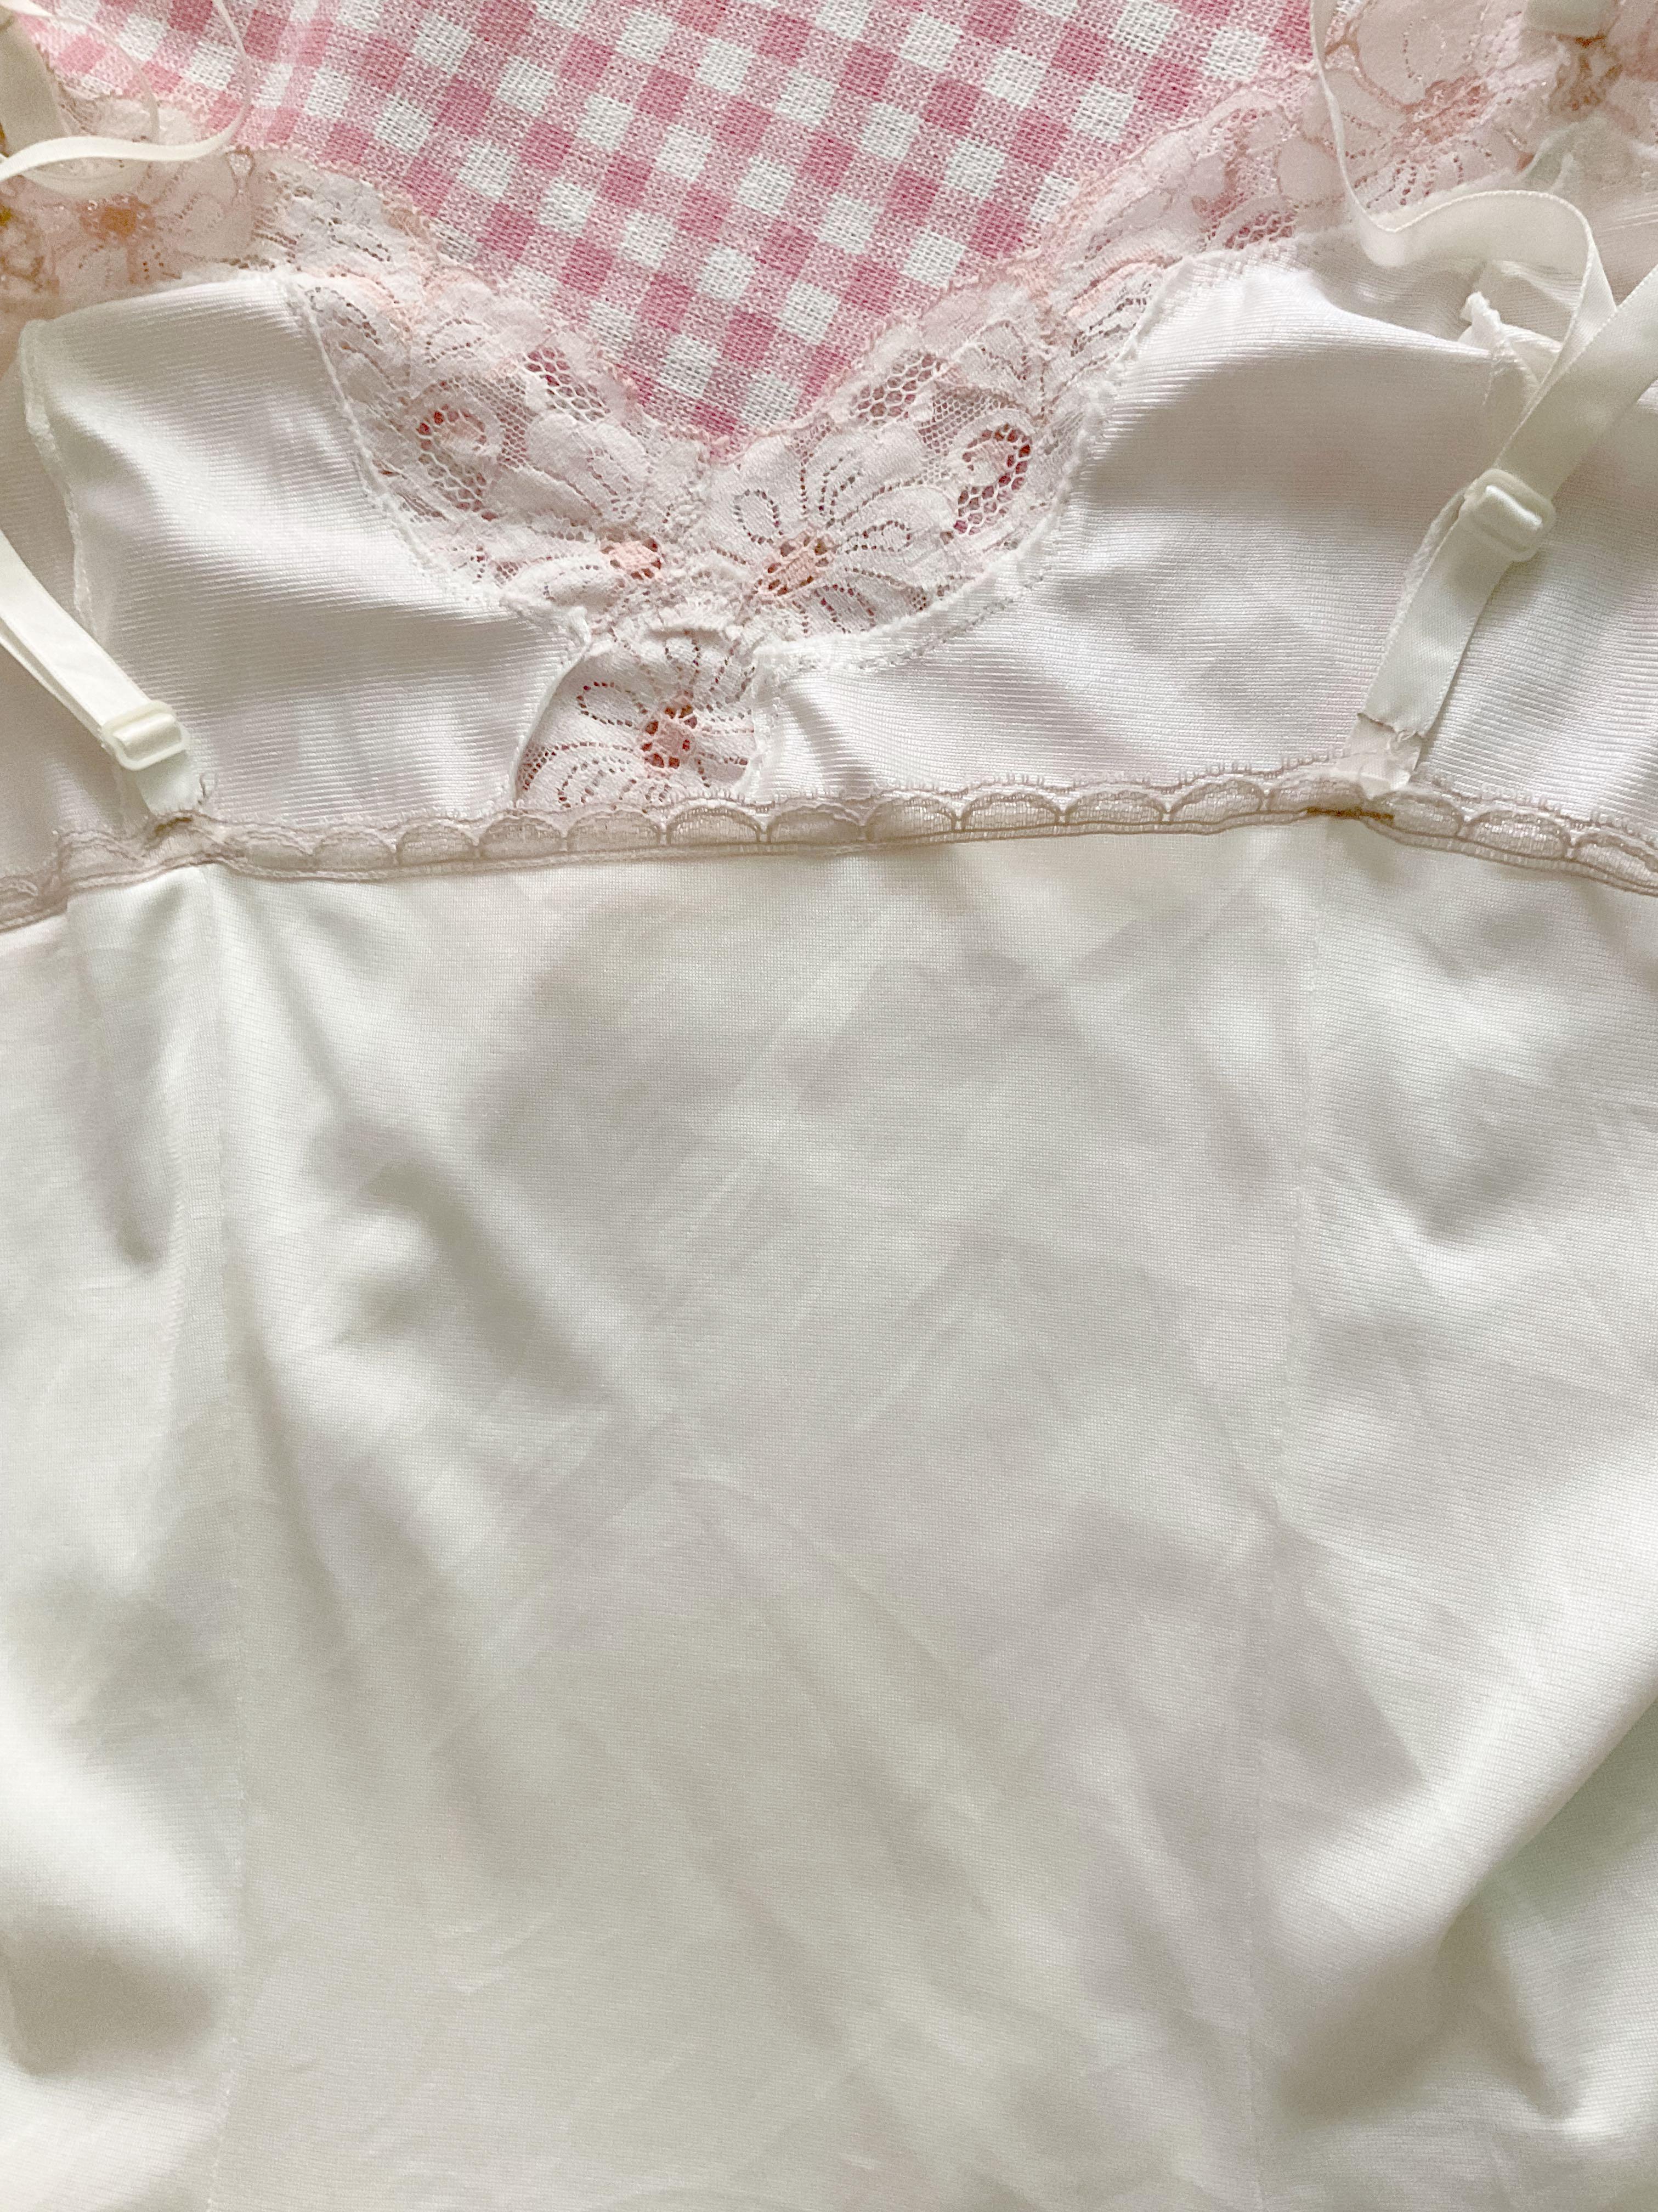 Vintage Lace Cami in White, Sweet Vintage Lace Camisoles from Spool 72.